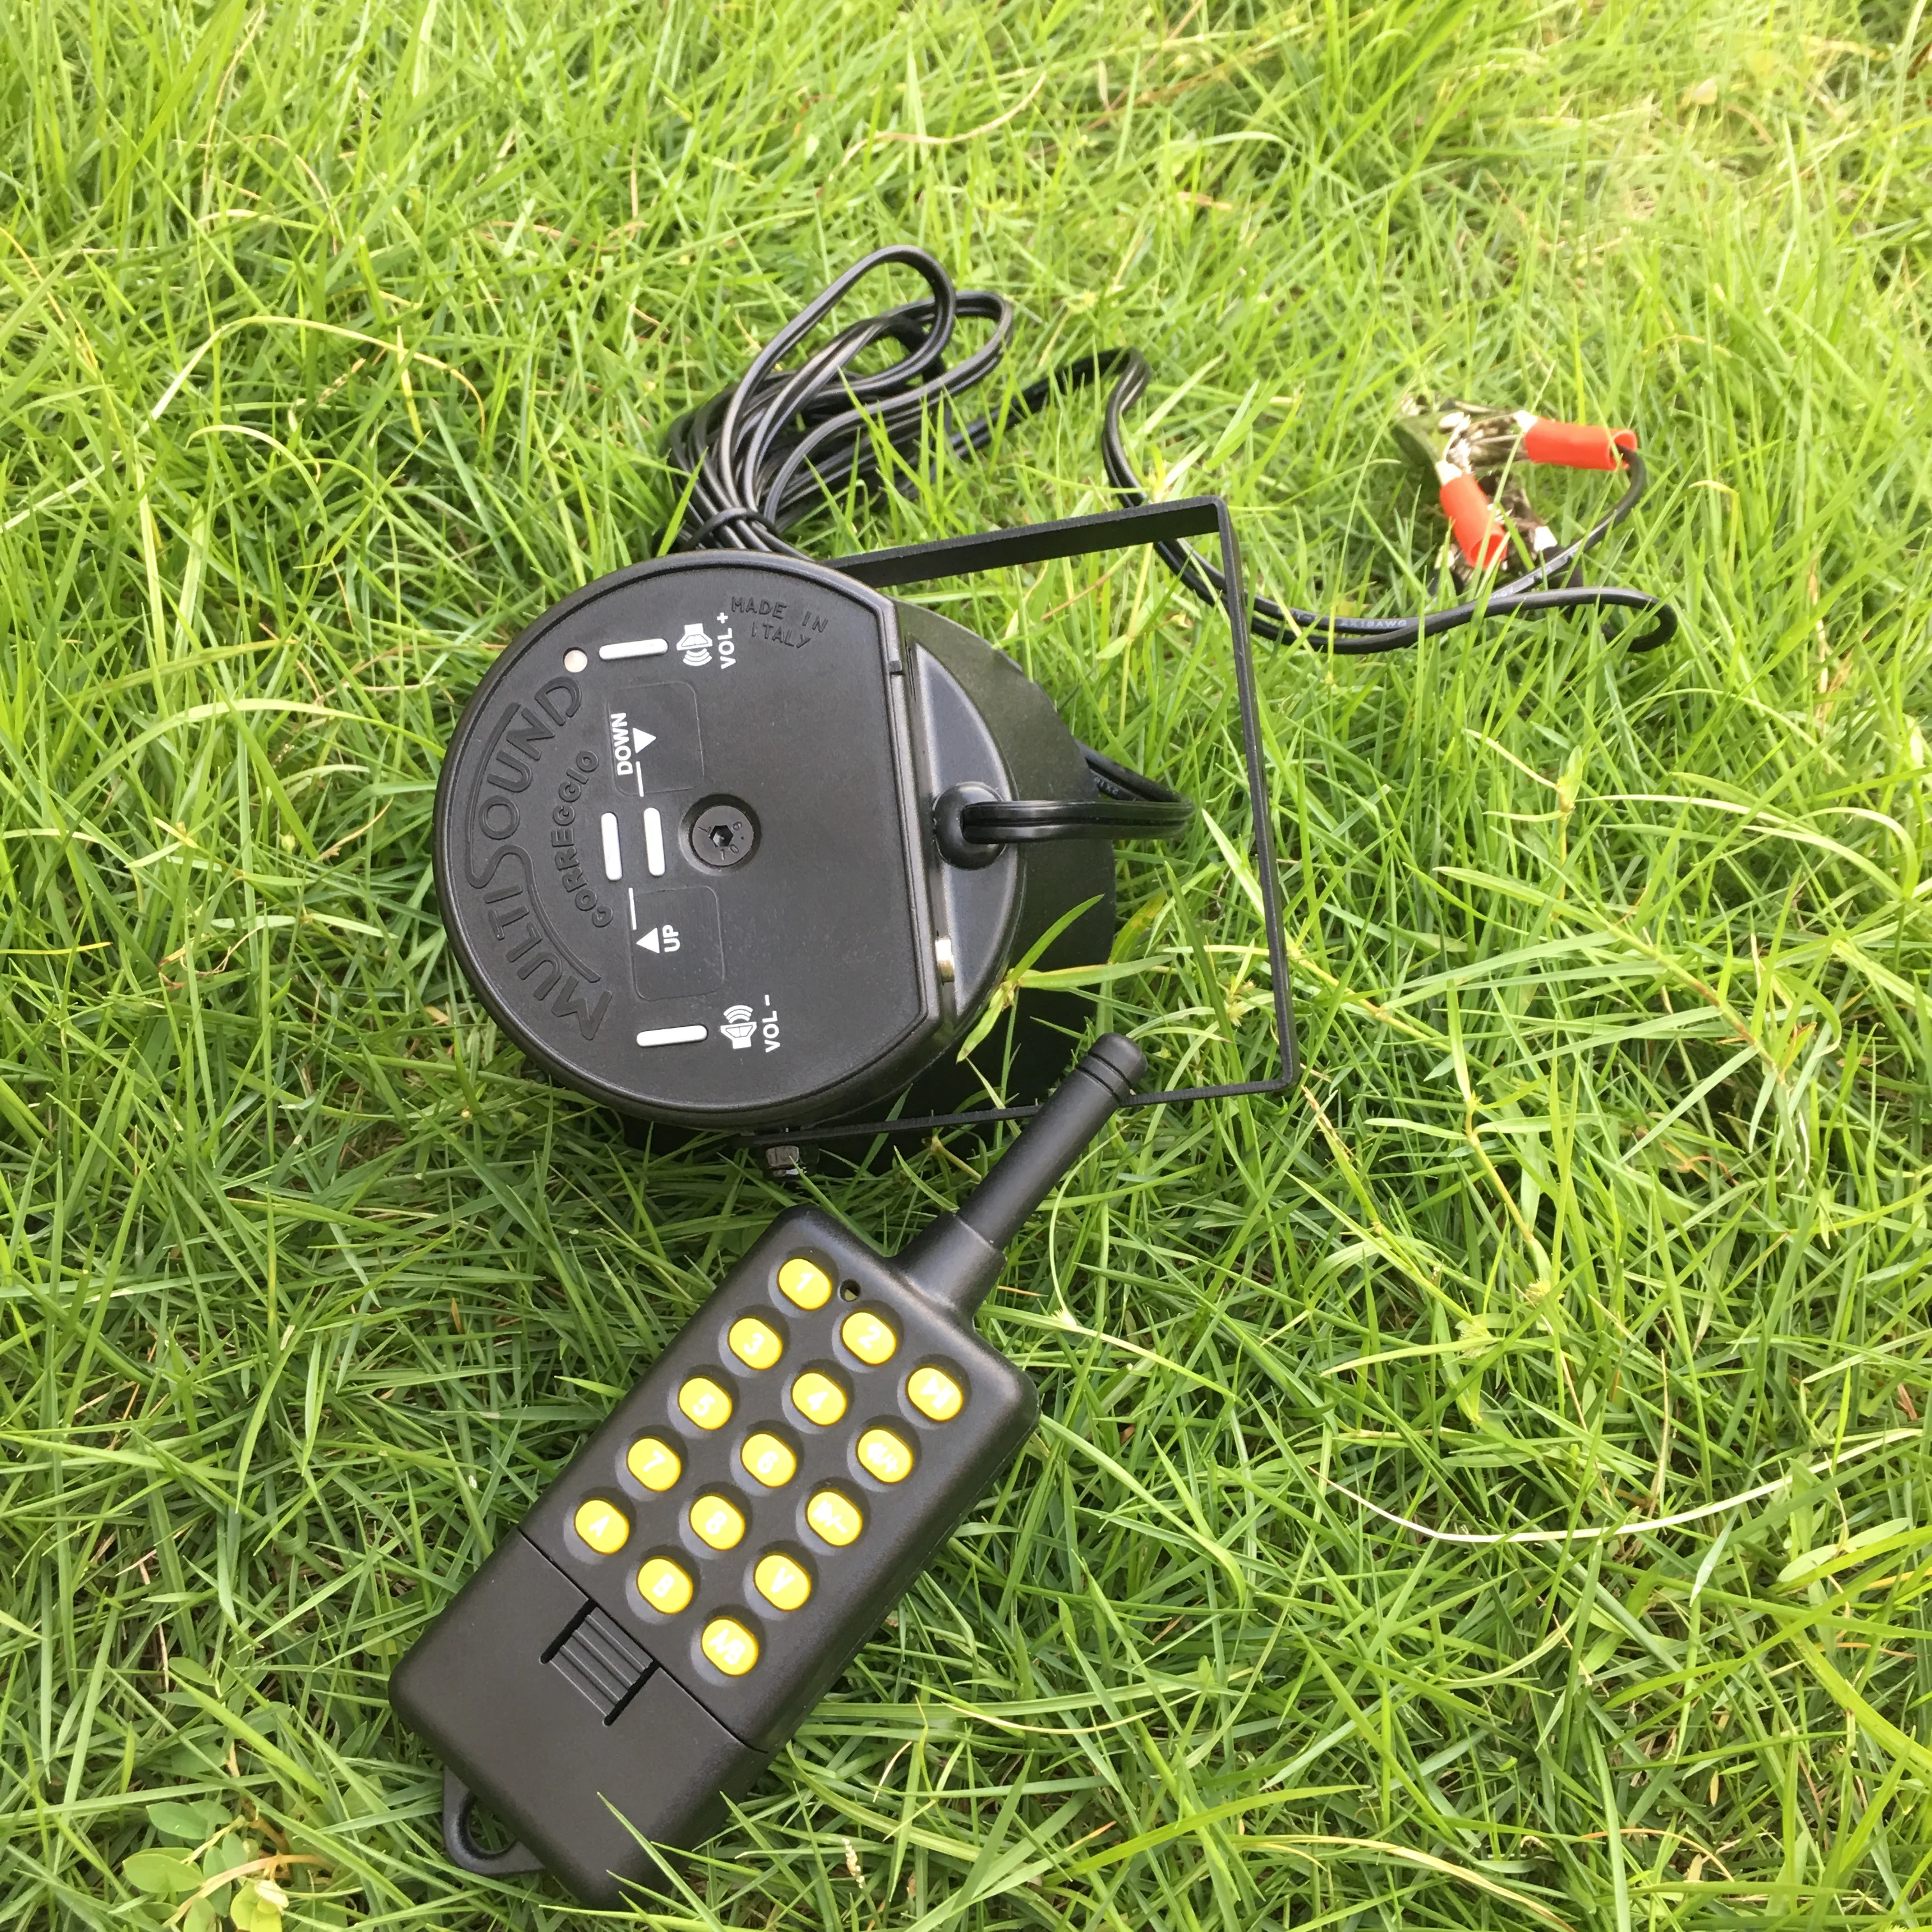 Multisounds bird caller with remote control MP3 MIX sounds  CP-395D Digital Hunting decoy device game call predator caller